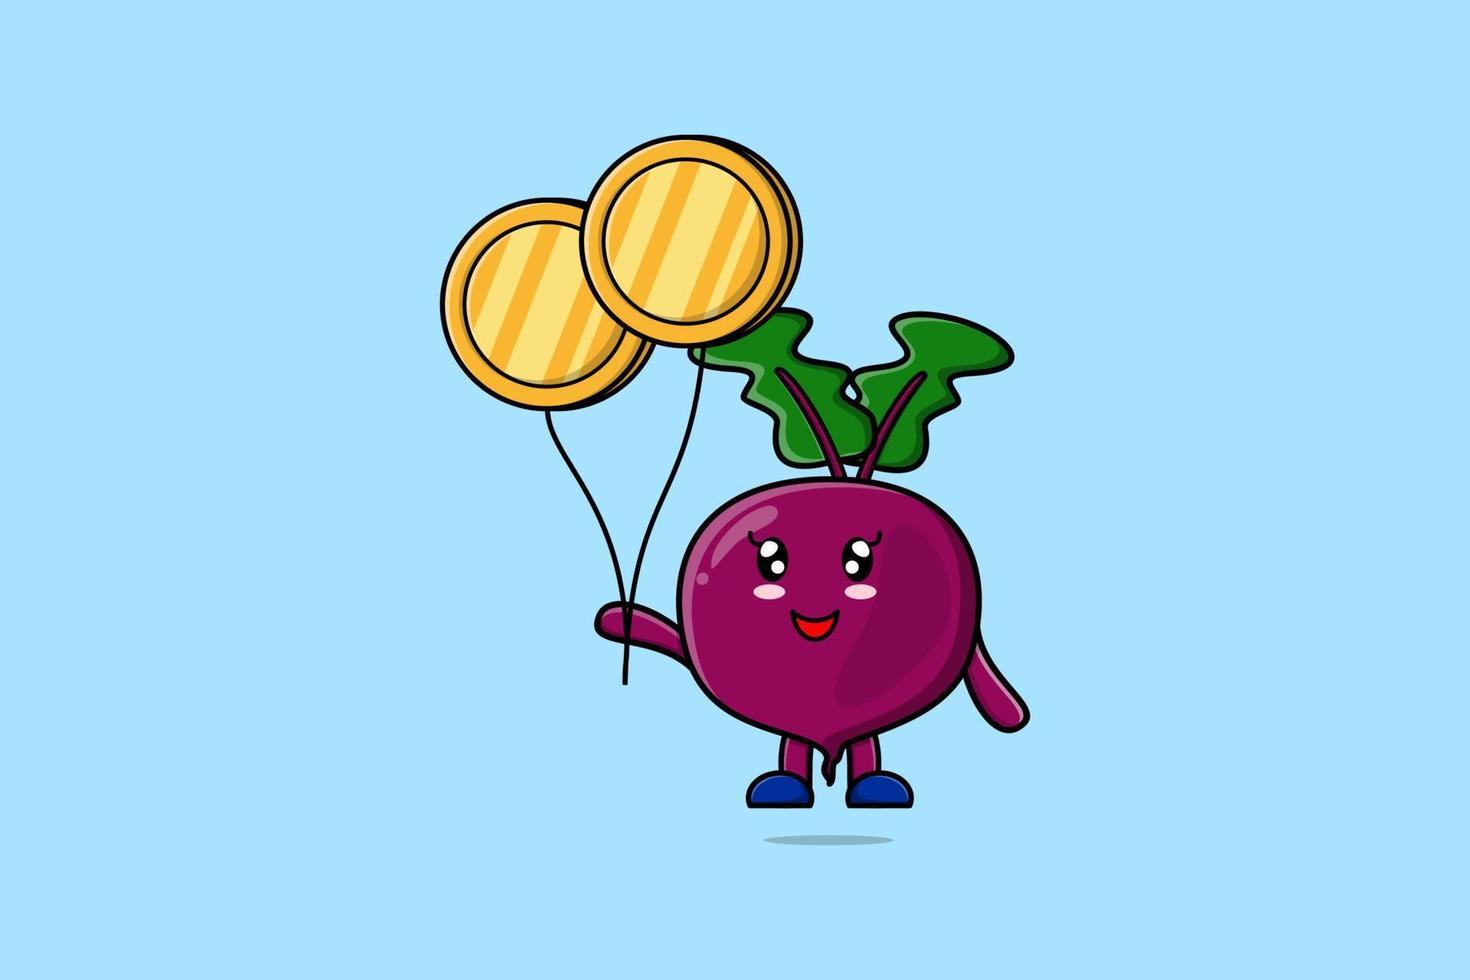 Cute cartoon Beetroot float with gold coin balloon vector